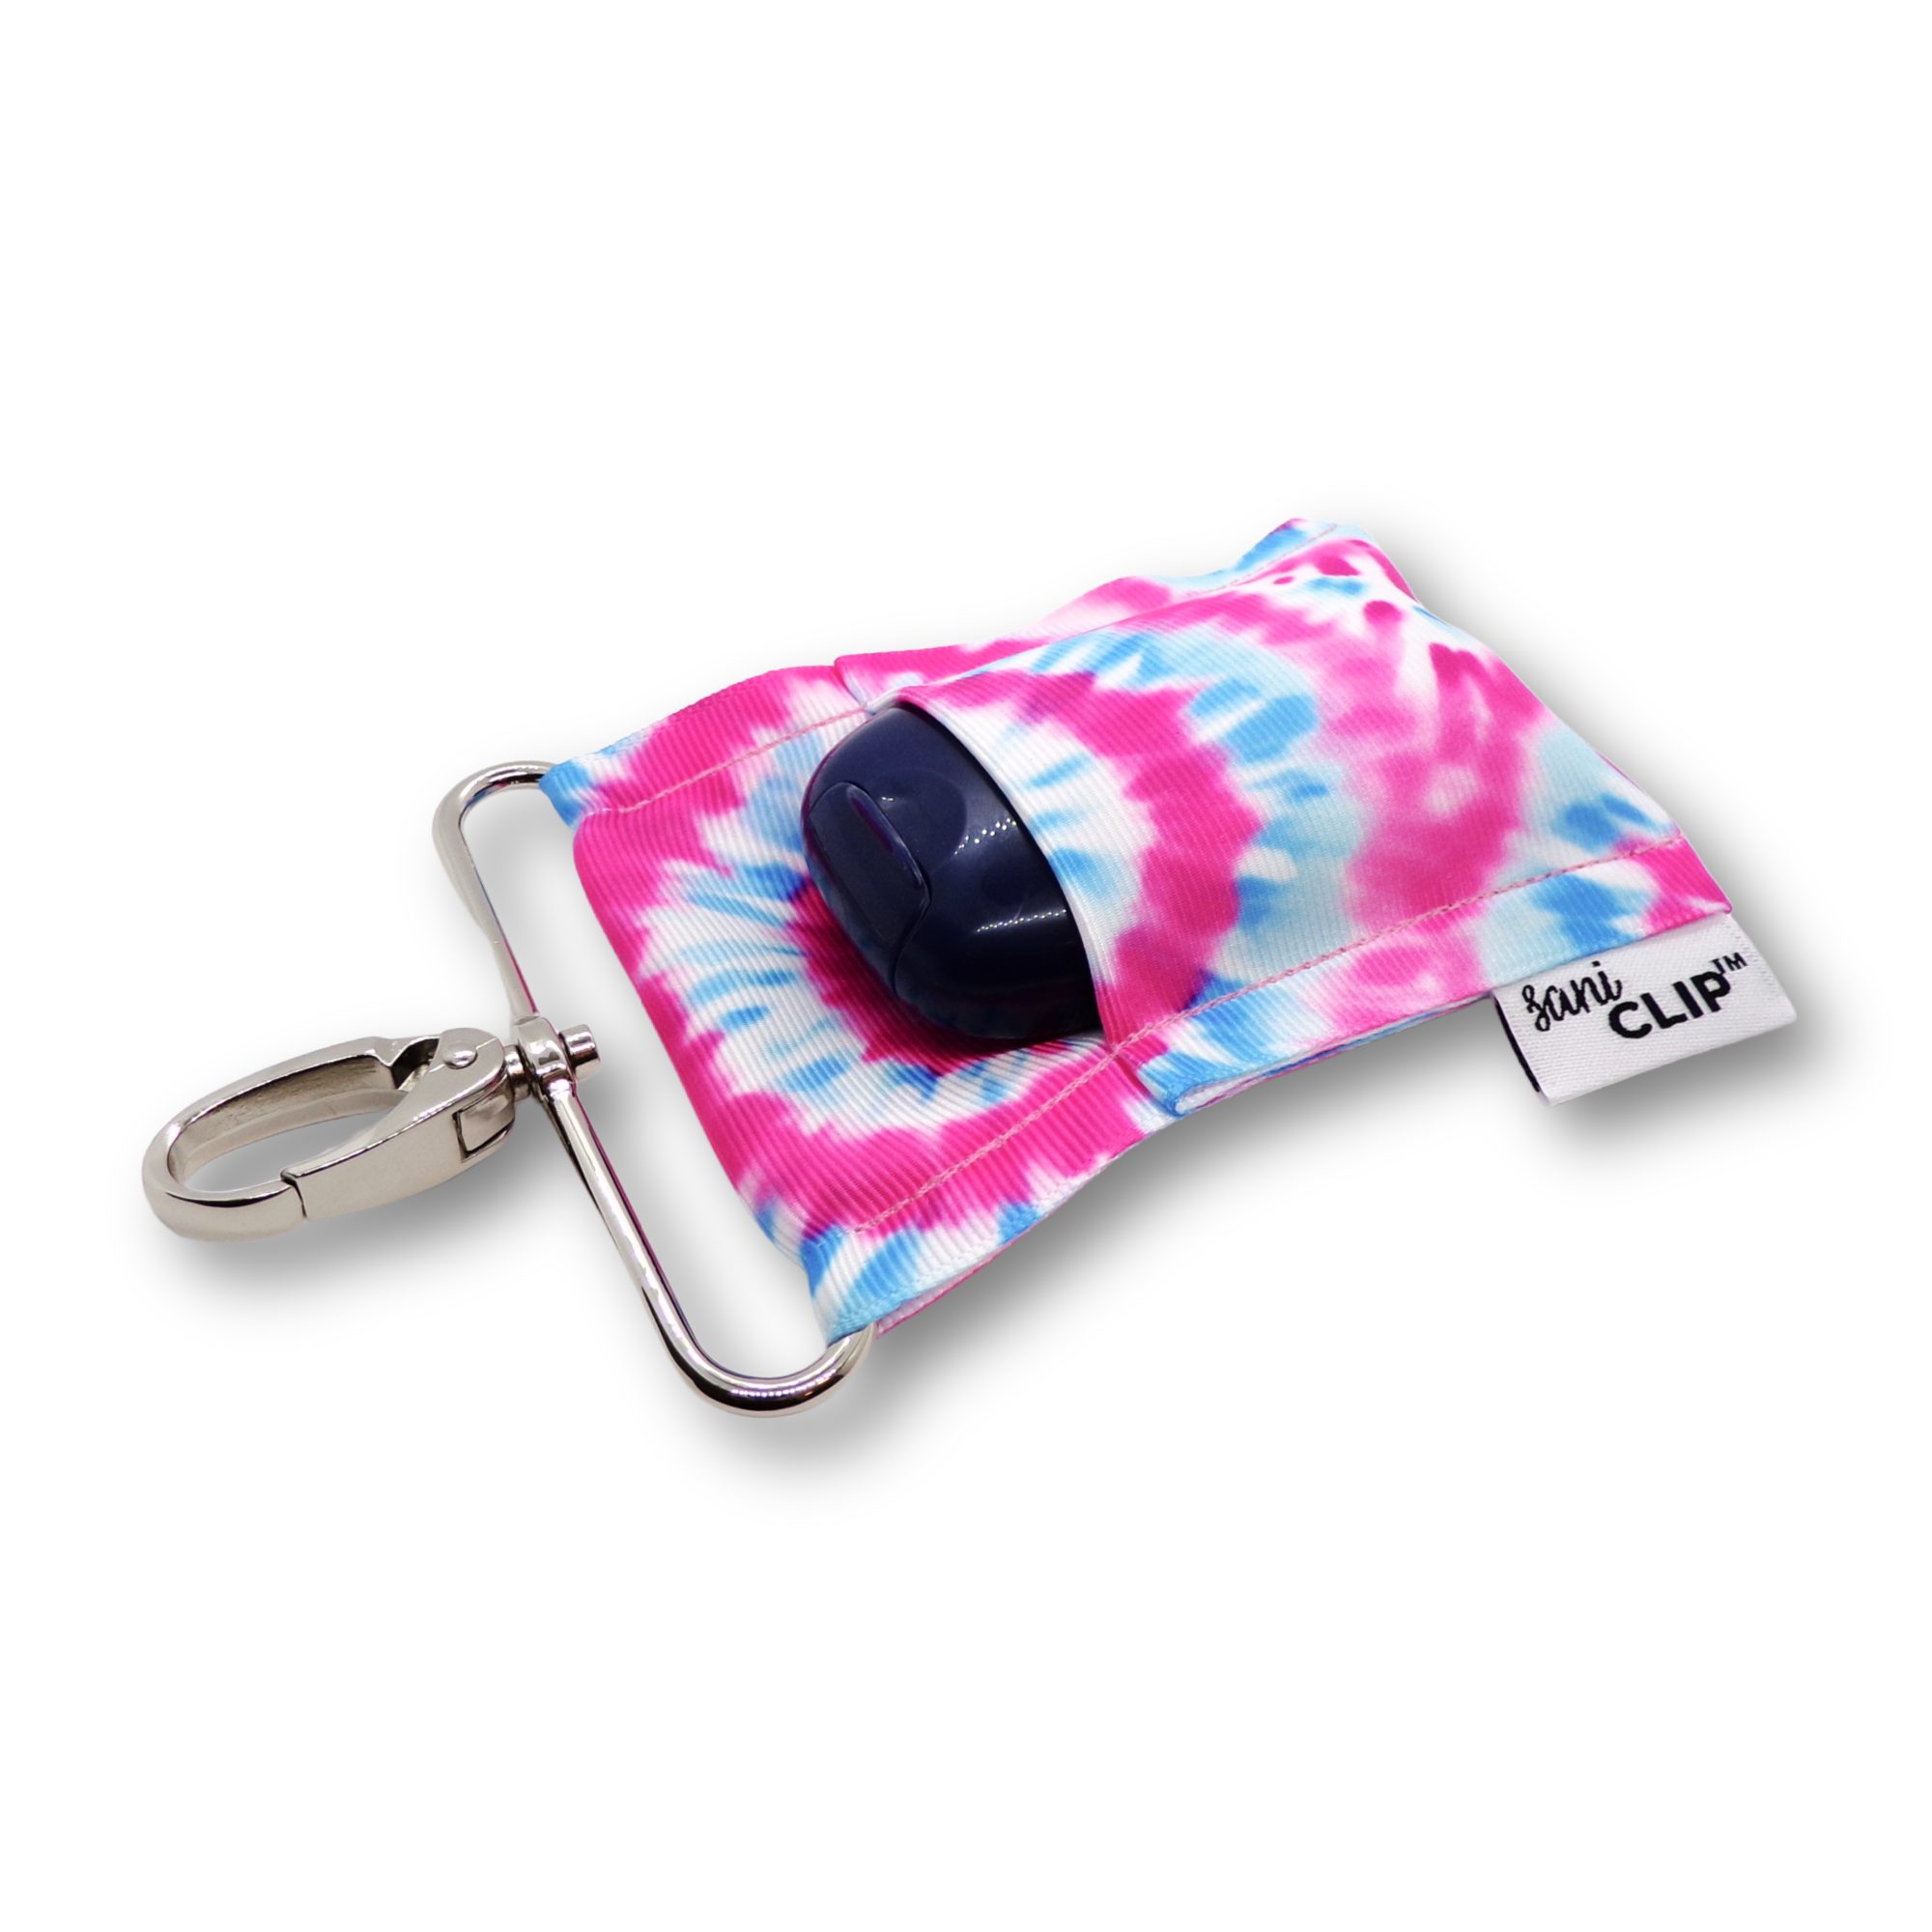 Pink tie dye mini hand sanitizer holder with silver clip.